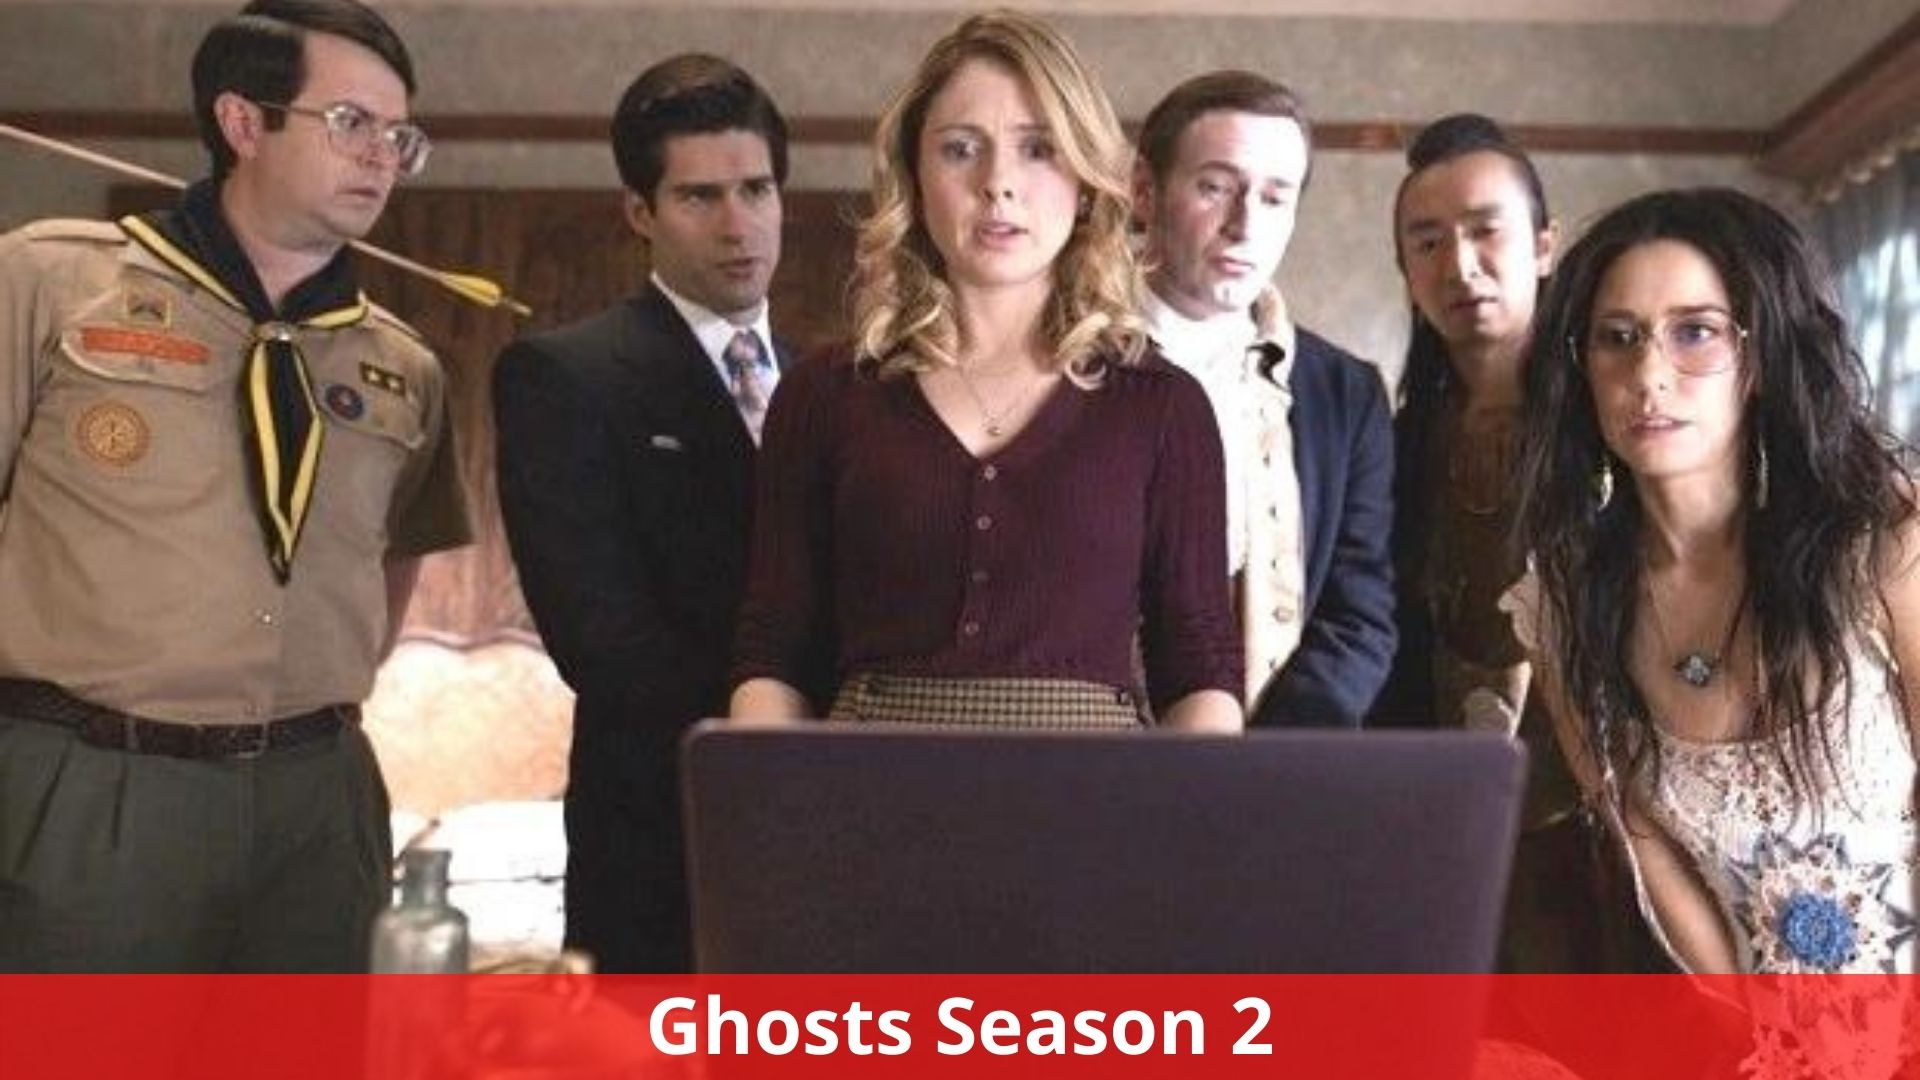 Ghosts Season 2 - Release Date, Cast, Plot, And More!